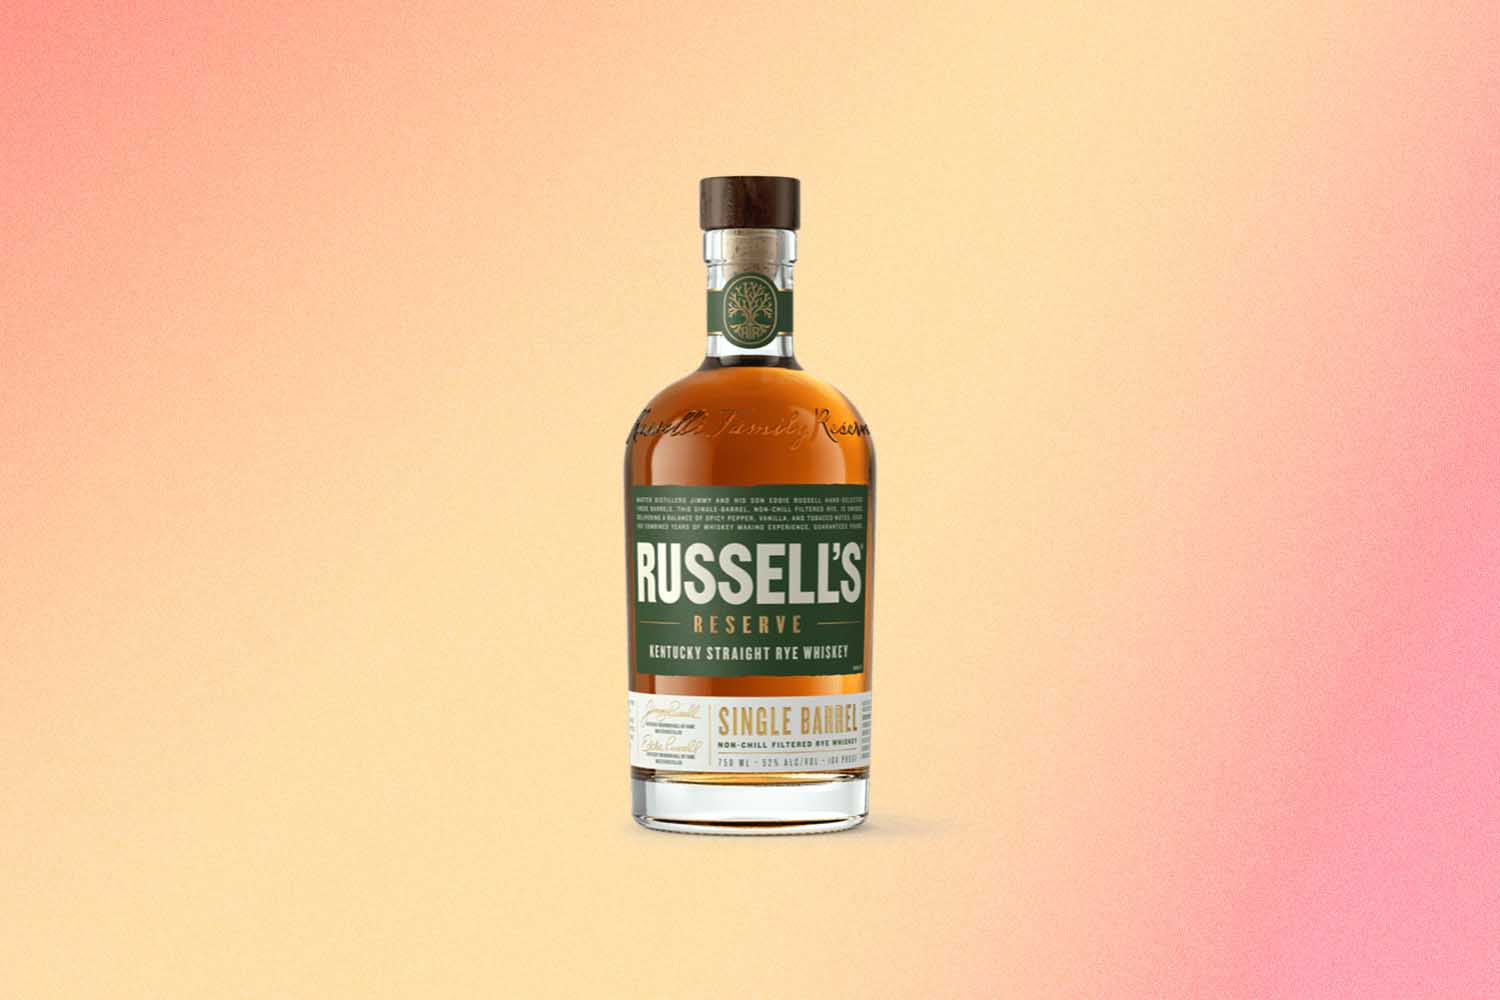 Russell’s Reserve Single Barrel Rye Whiskey